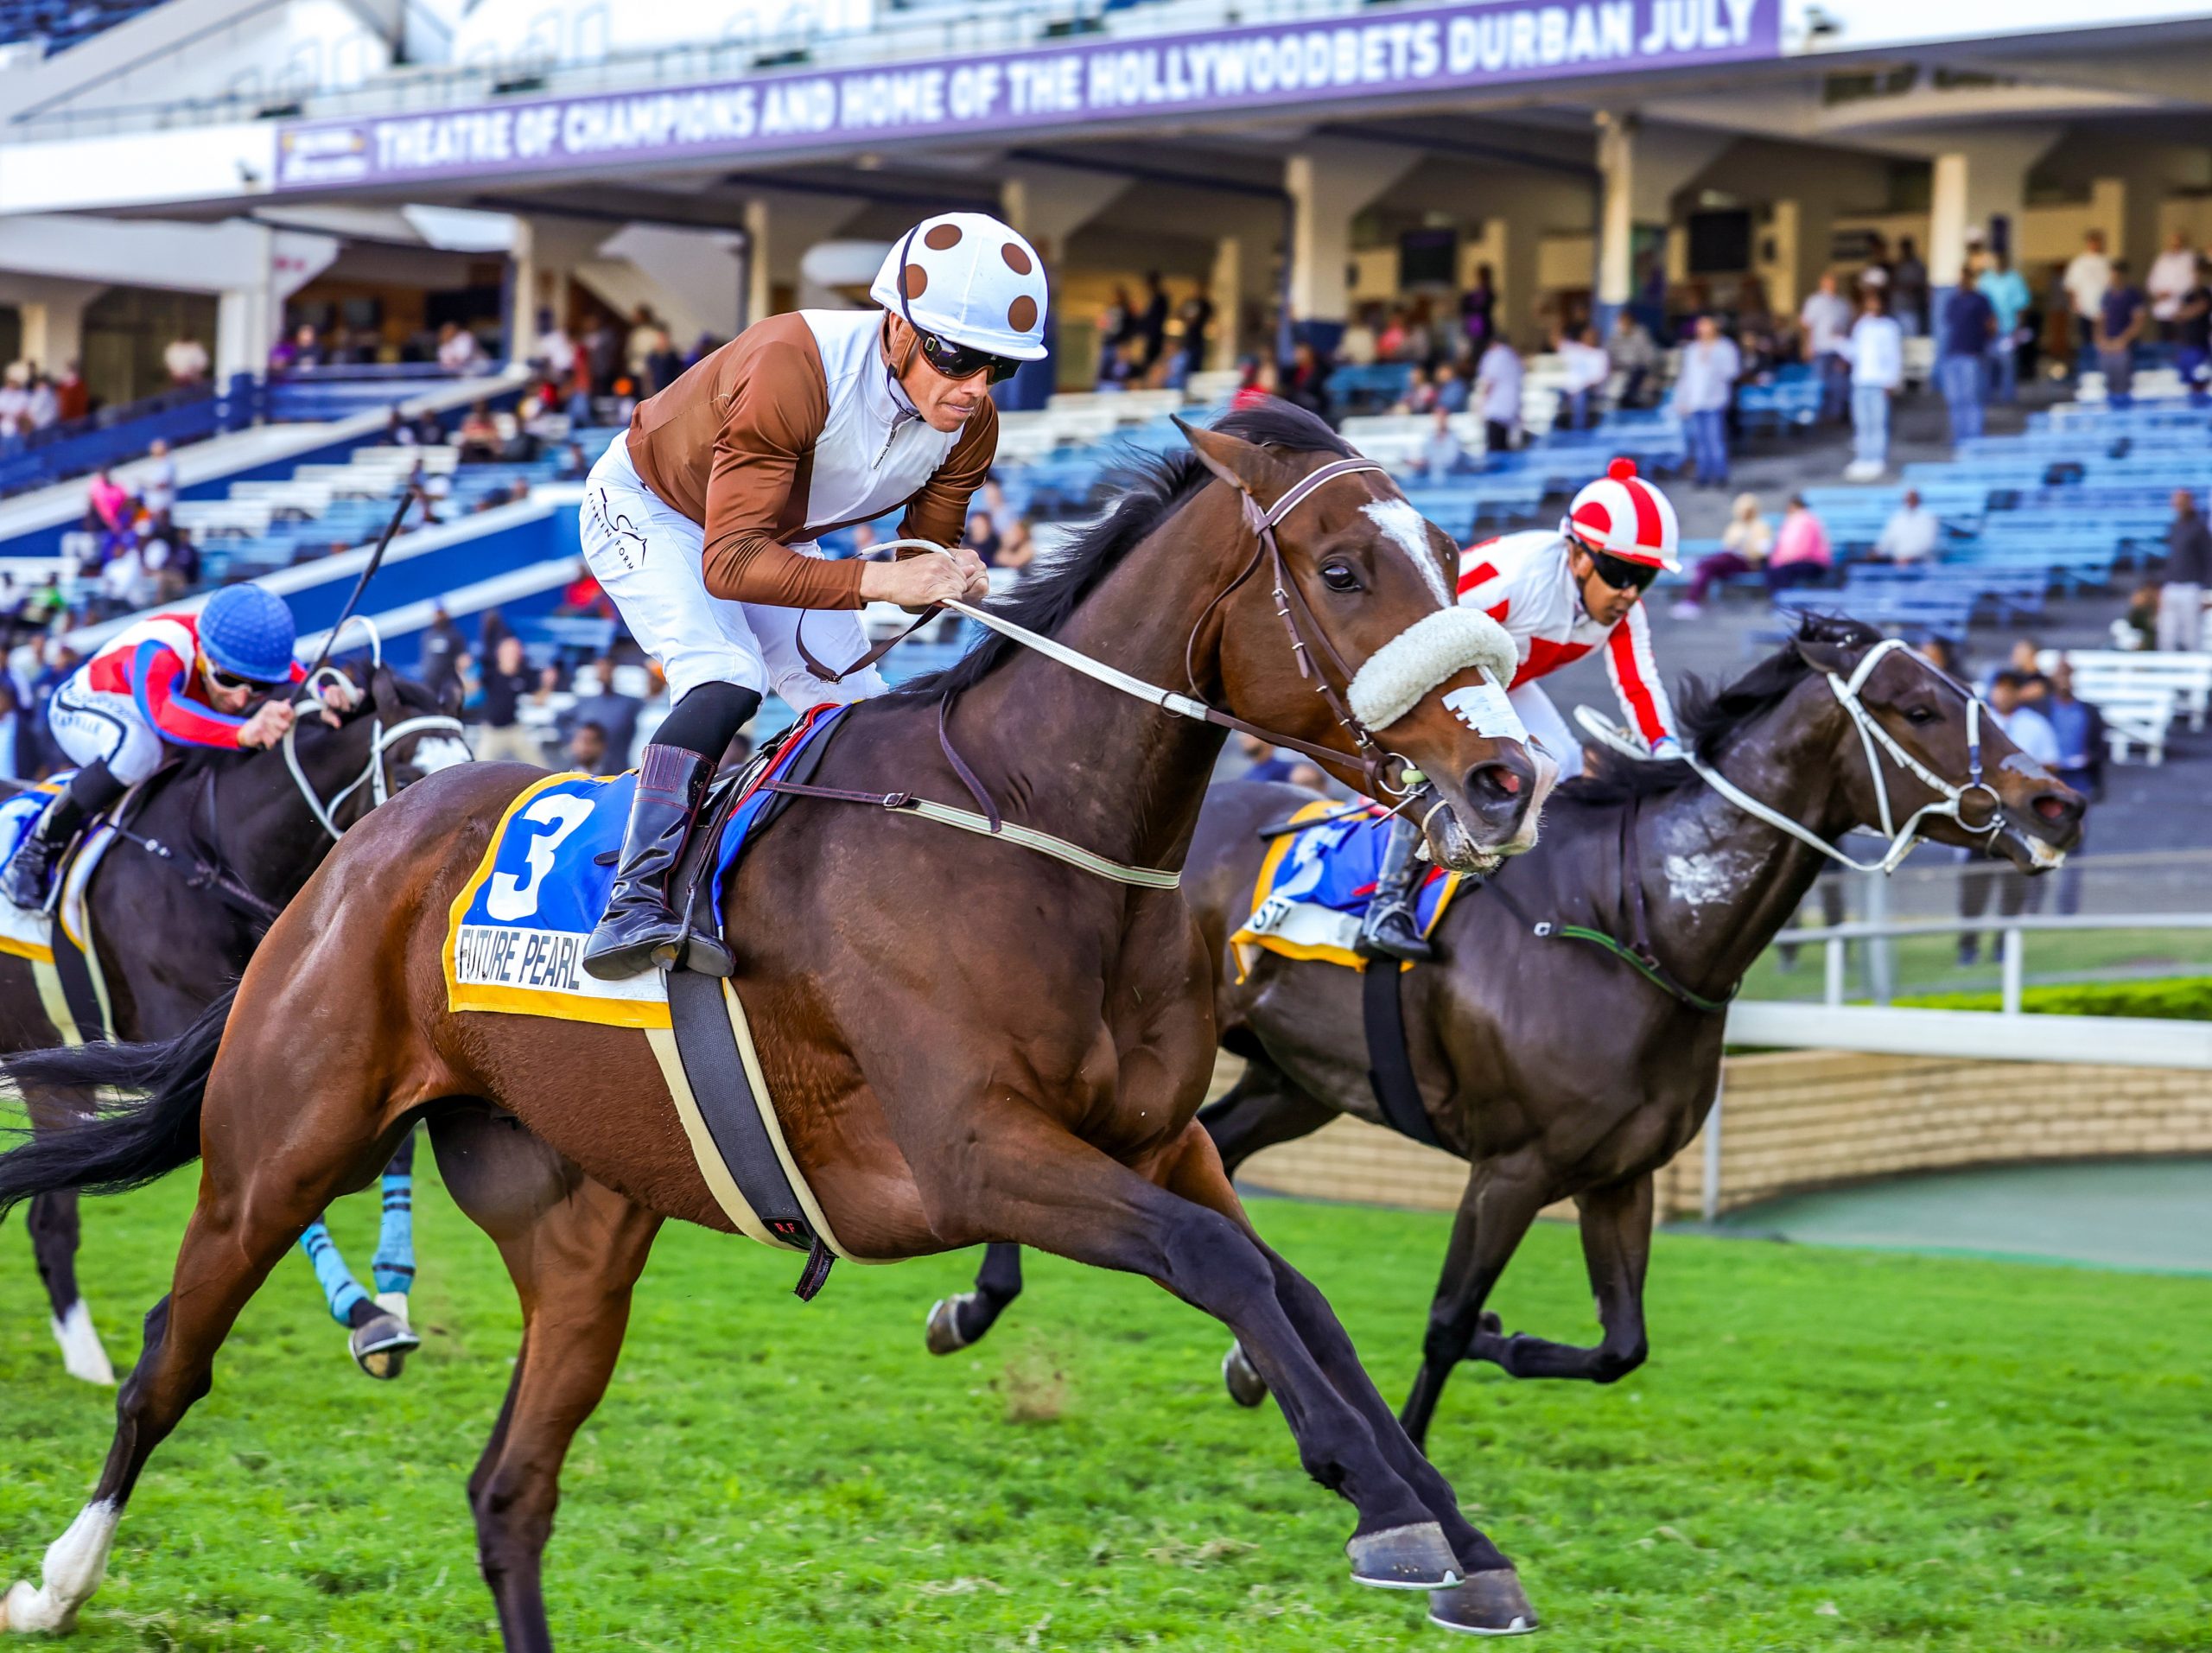 Richard Fourie delivers Future Pearl in style to beat fellow Hollywoodbets Durban July entry Aragosta (Muzi Yeni) in a cracking big race prep